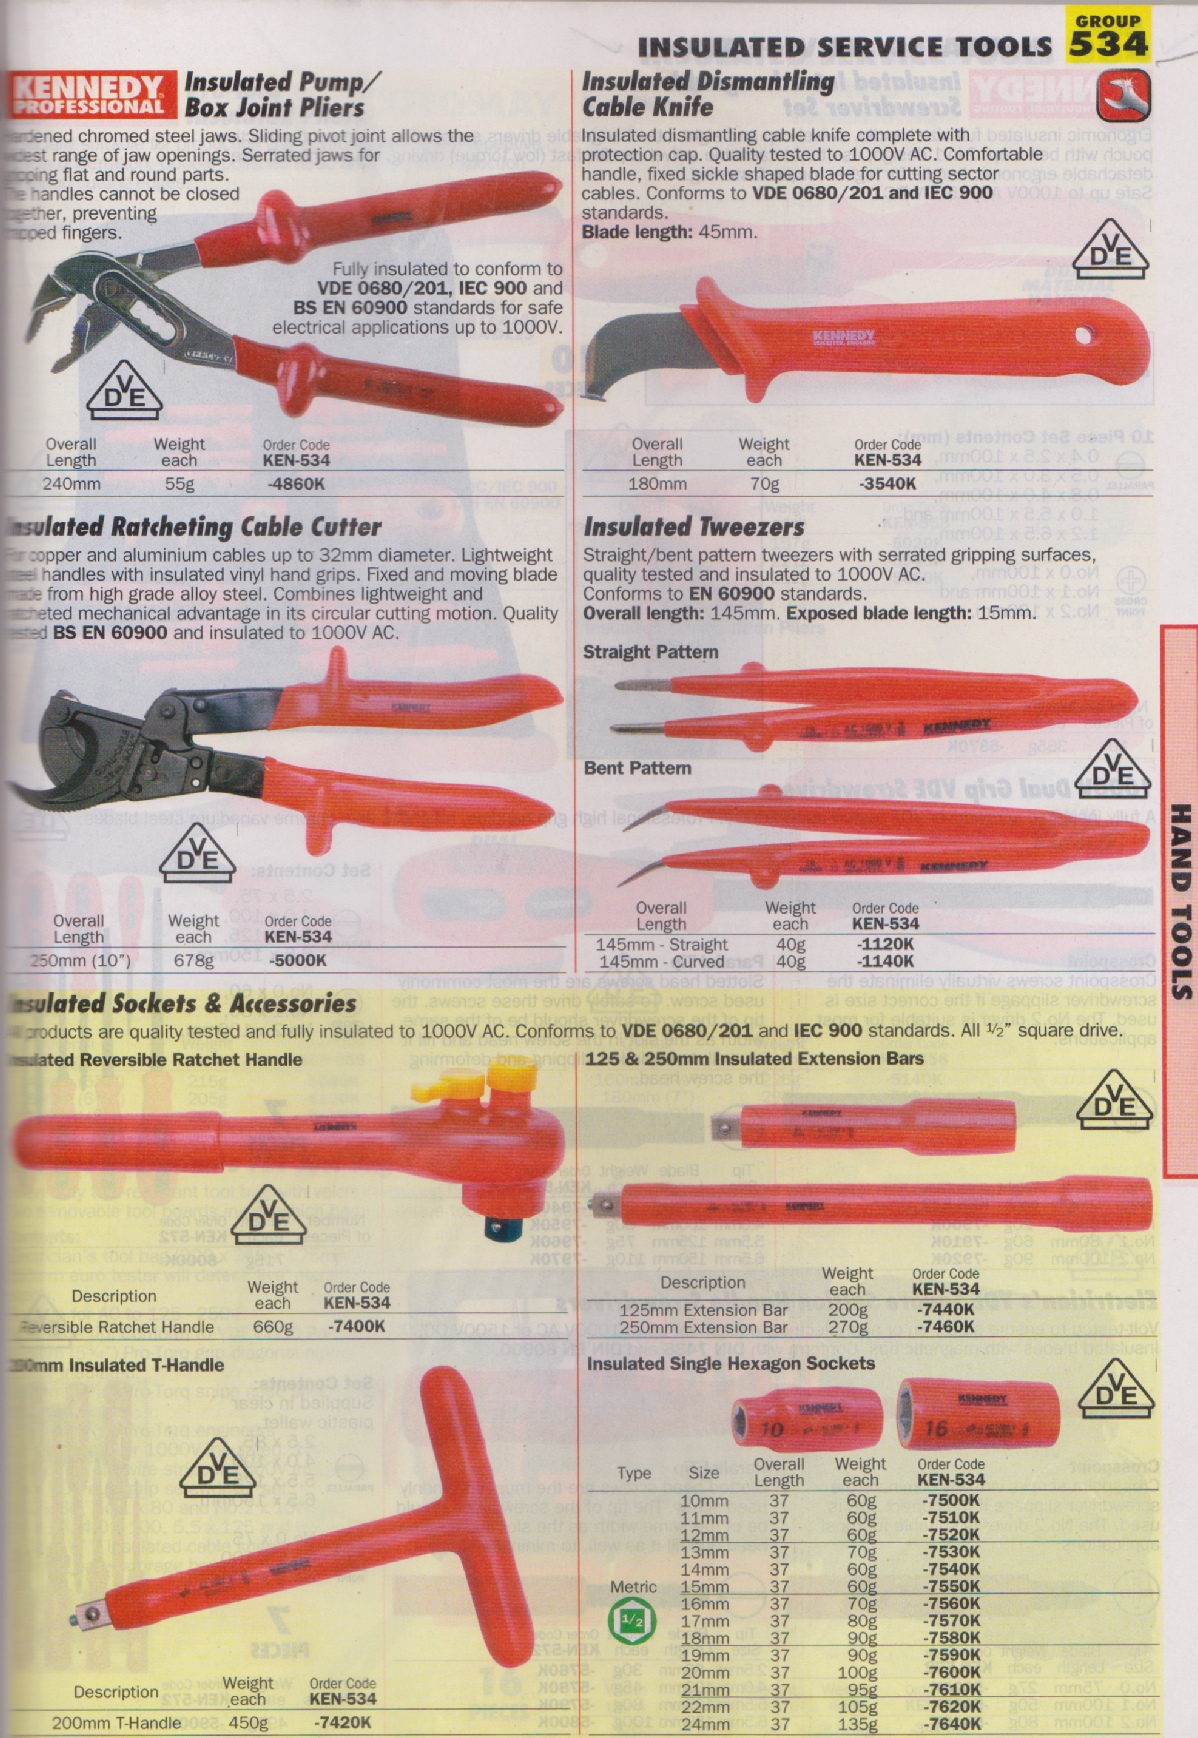 insulated service tools,chennai,insulated pump-box joint pliers,insulated dismantling cable knife,insulated ratcheting cable cutter,insulated tweezers,insulated sockets and accessories